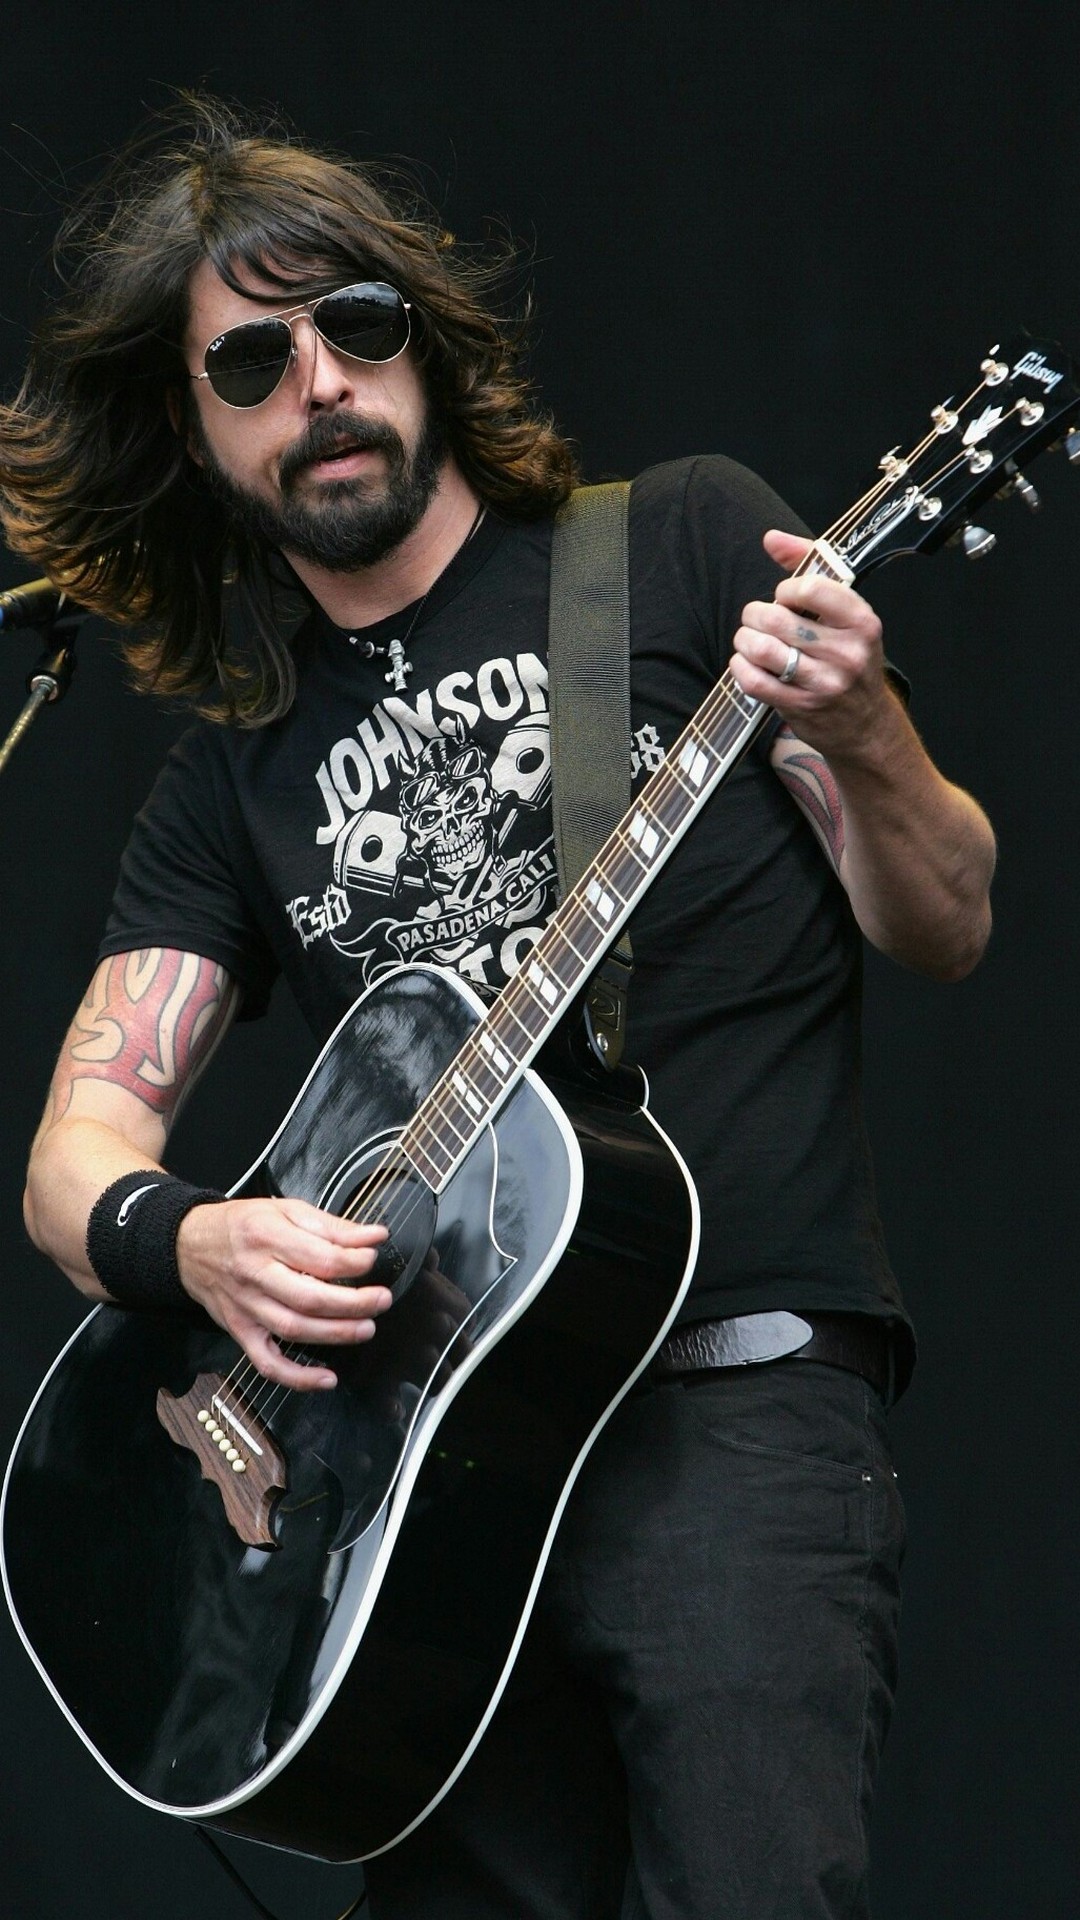 Dave Grohl Foo Fighters iPhone Wallpaper resolution 1080x1920